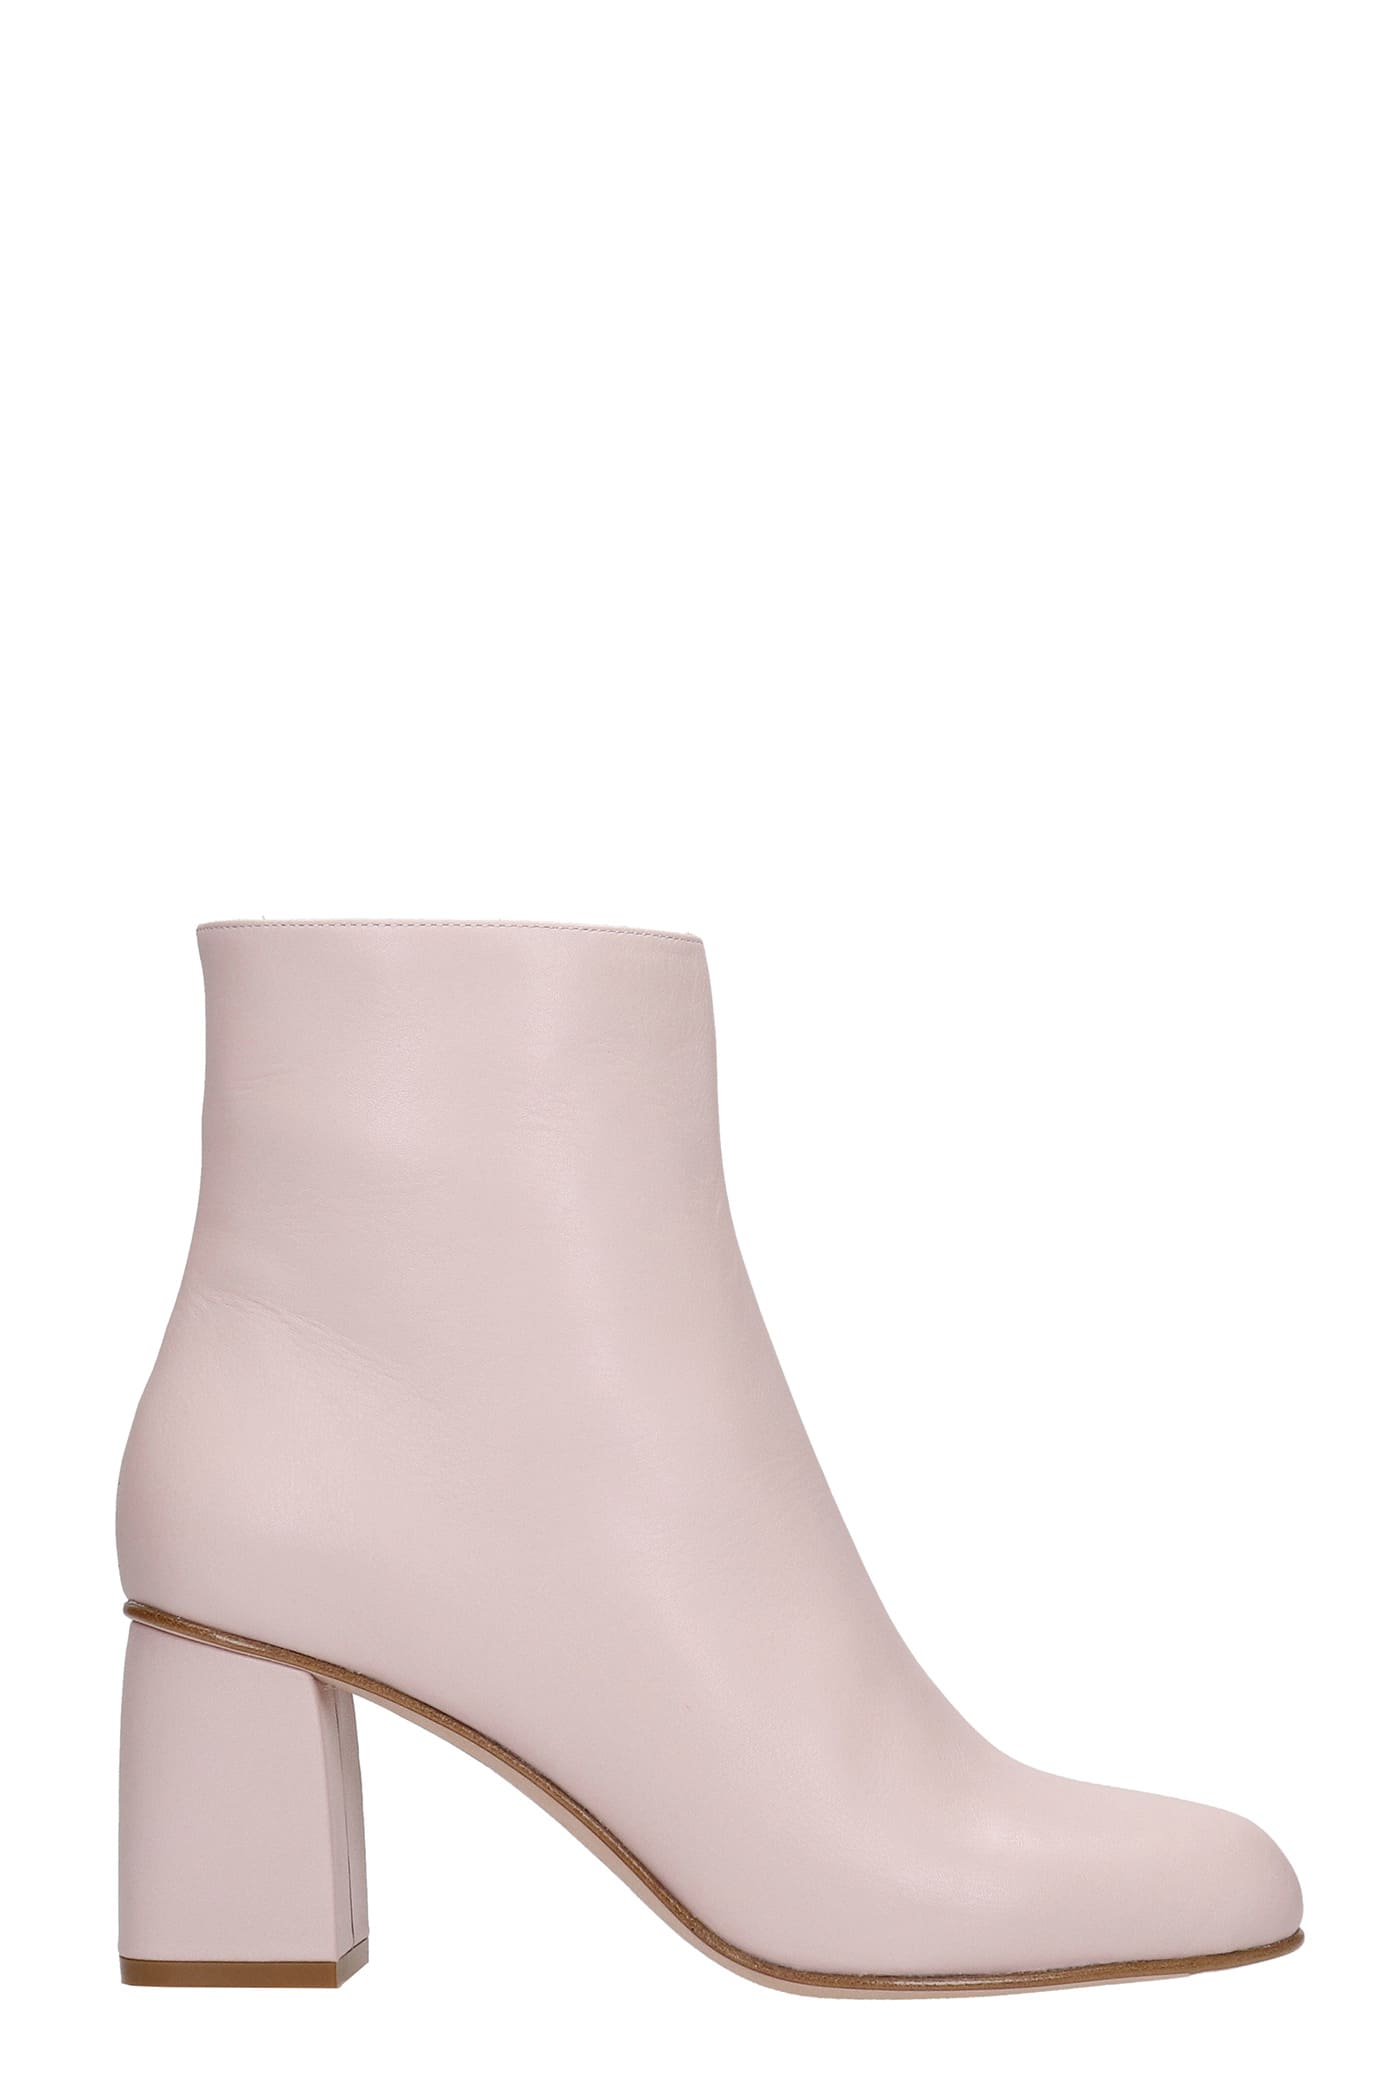 RED Valentino Low Heels Ankle Boots In Rose-pink Leather